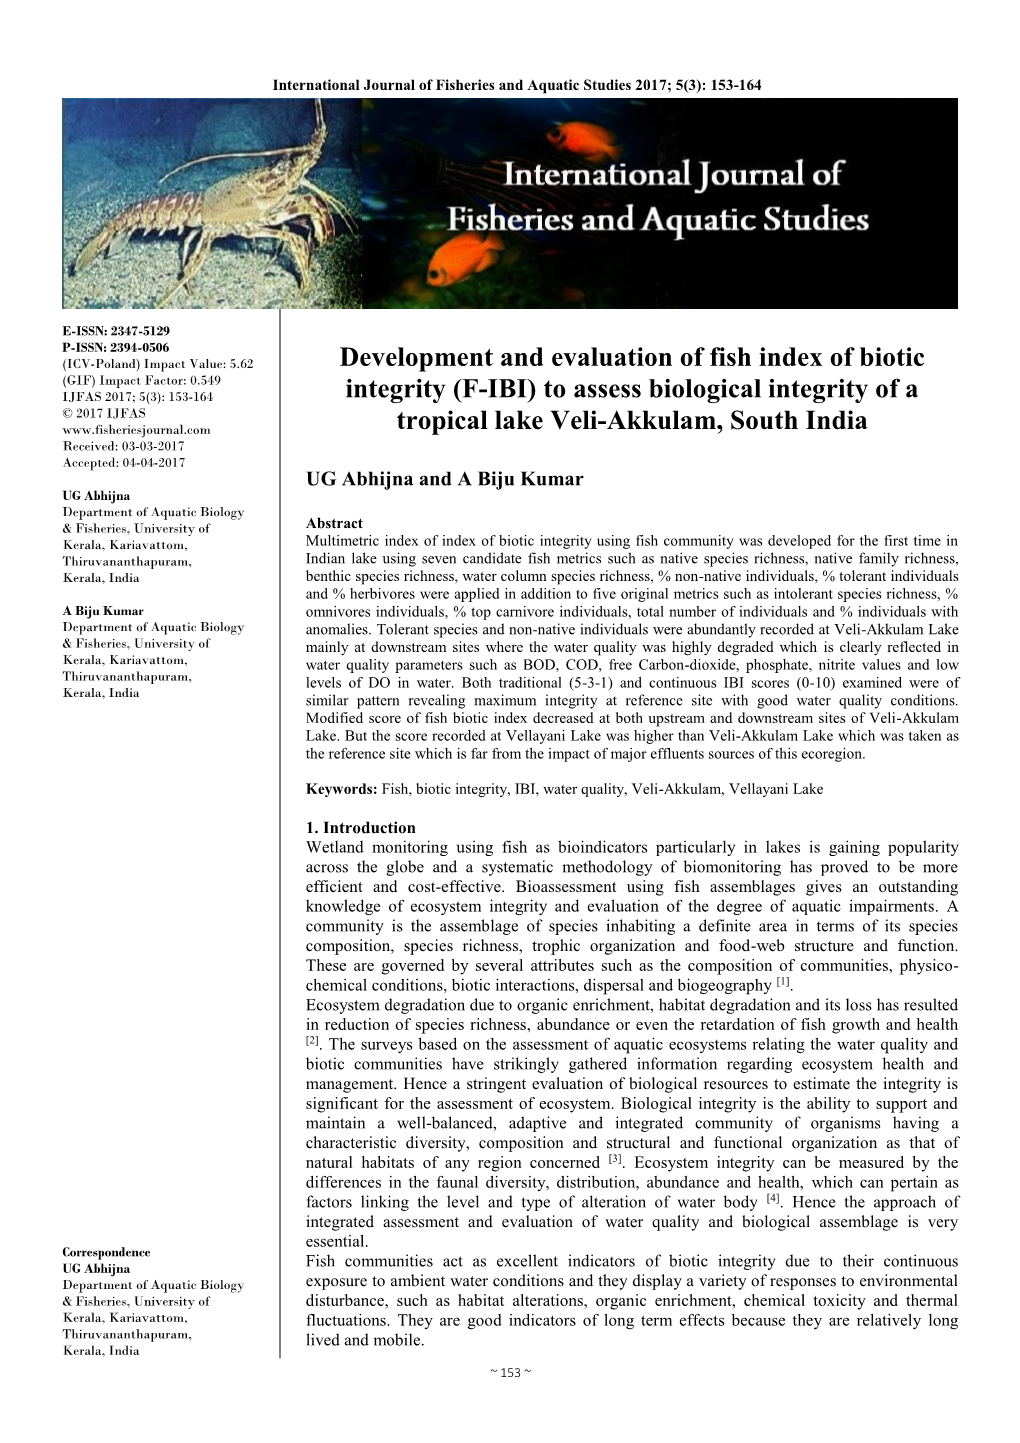 Development and Evaluation of Fish Index of Biotic Integrity (F-IBI) To